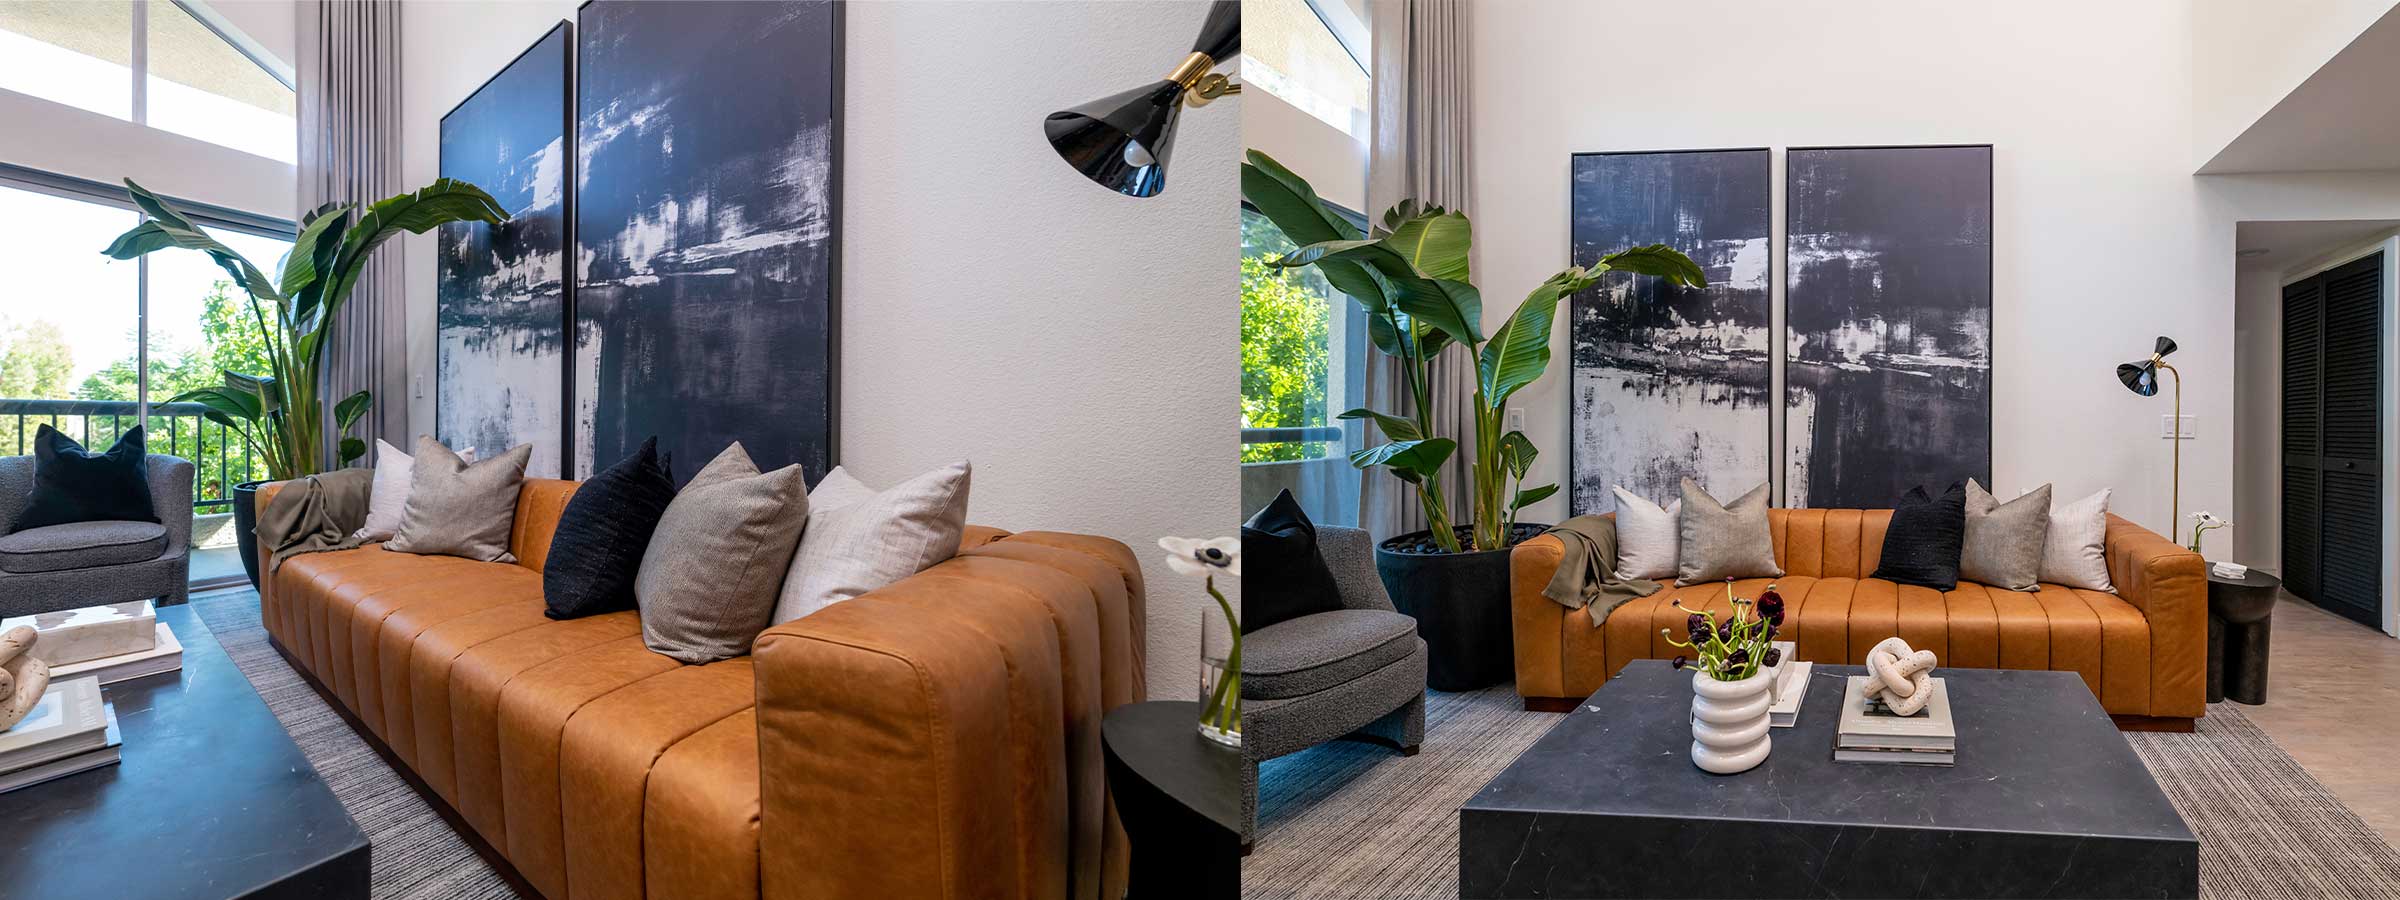 Property Brothers Celebrity I.O.U. Season 3 features a custom 44x100" diptych canvas created for Howie Mandel's manager and friend. The dramatic charcoals create contrast and a focal point for the living room.  